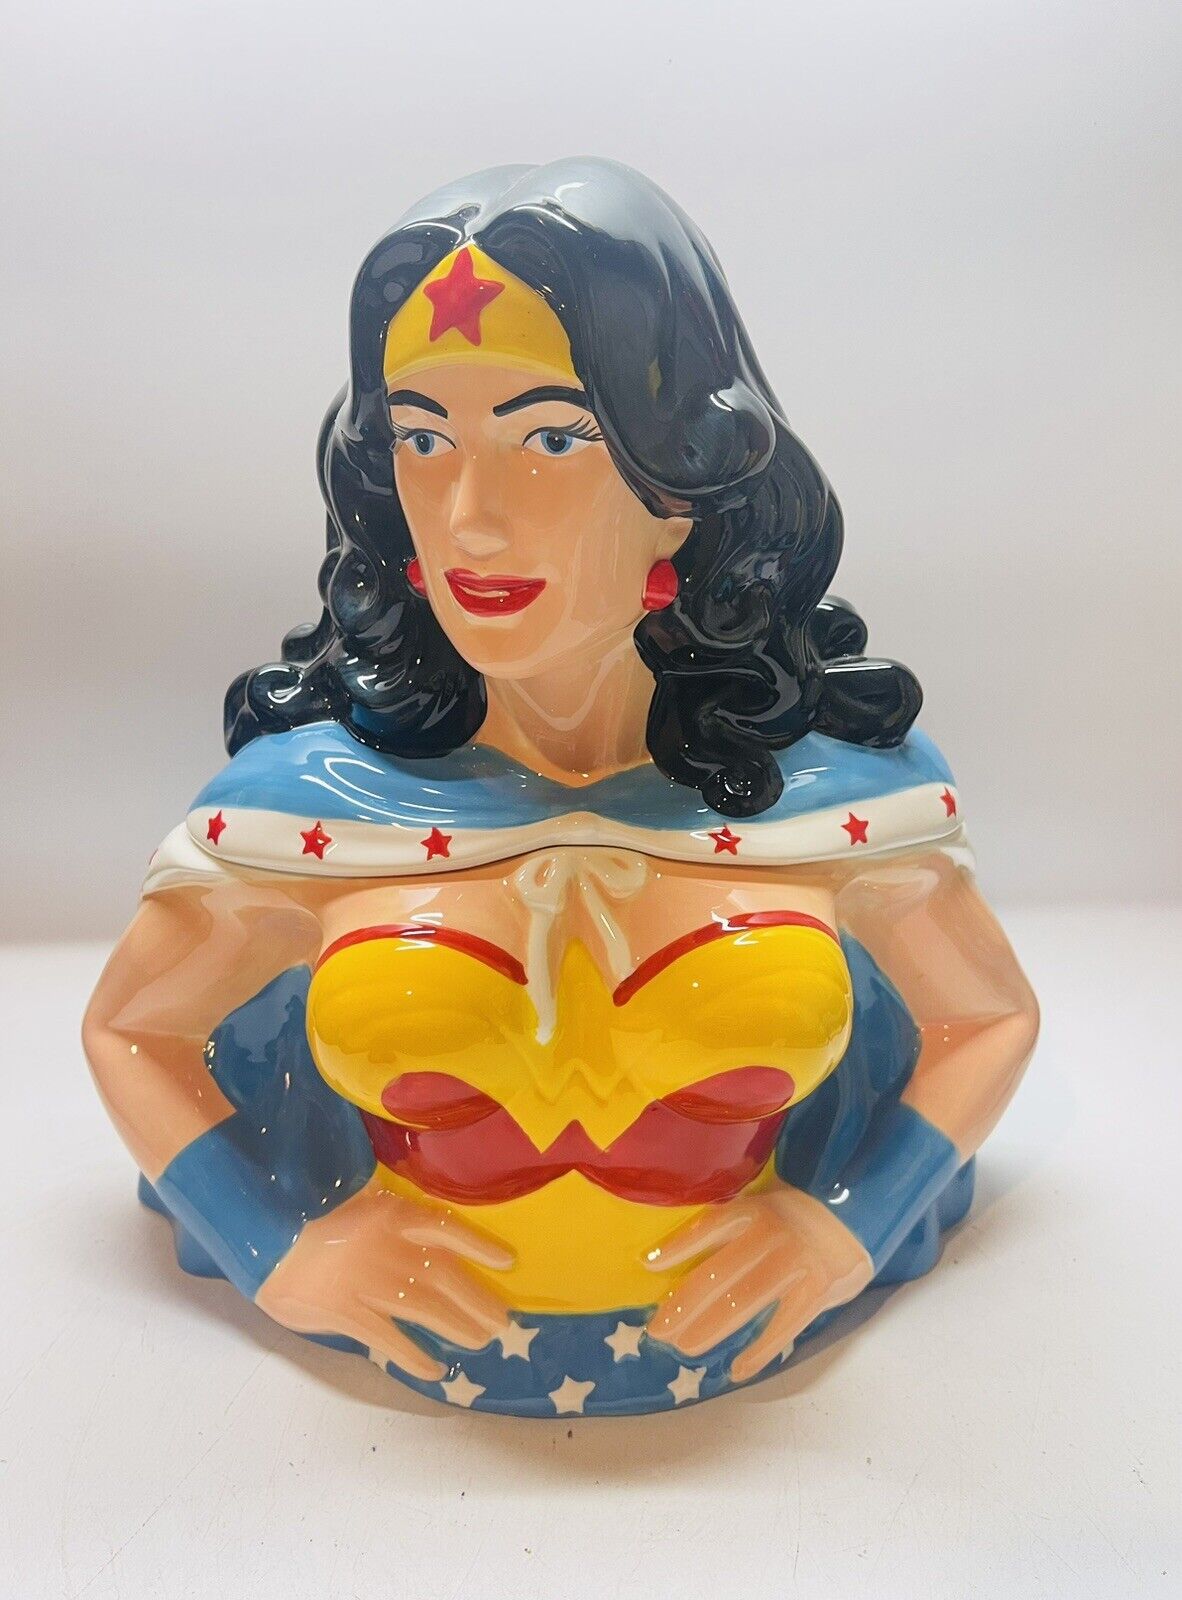 Wonder Woman Cookie Jar 2013 Westland Giftware W/ Box Never Used Excellent Cond 